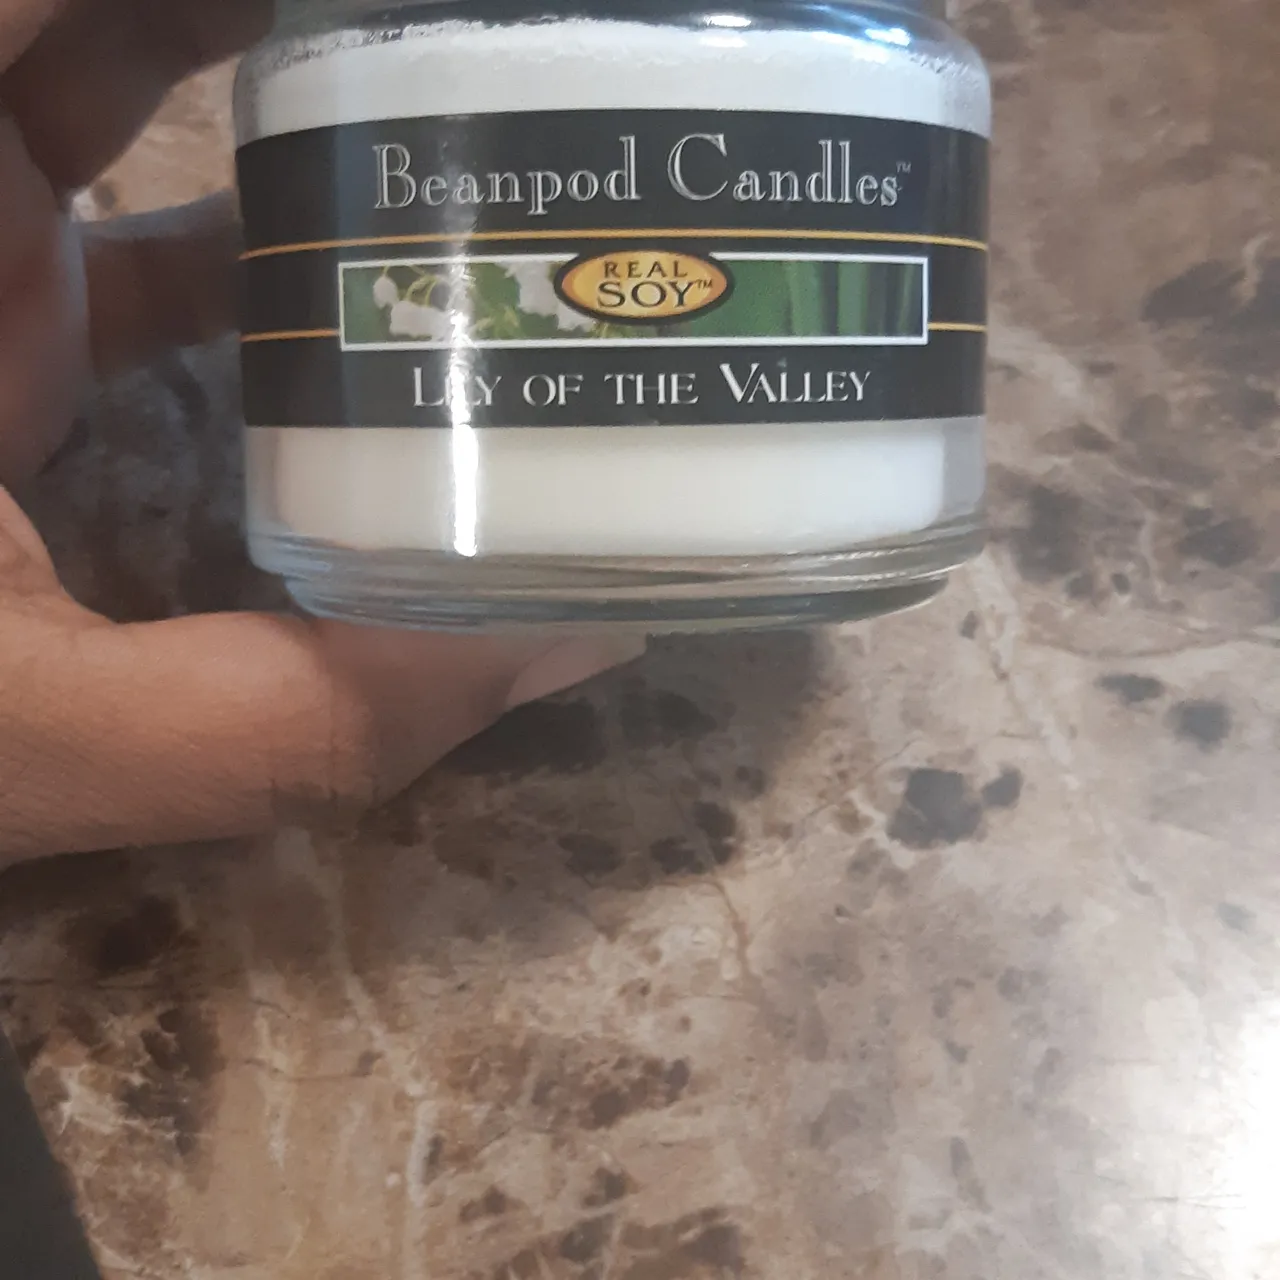 Beanpod Candles lily of the valley soy candle  photo 1